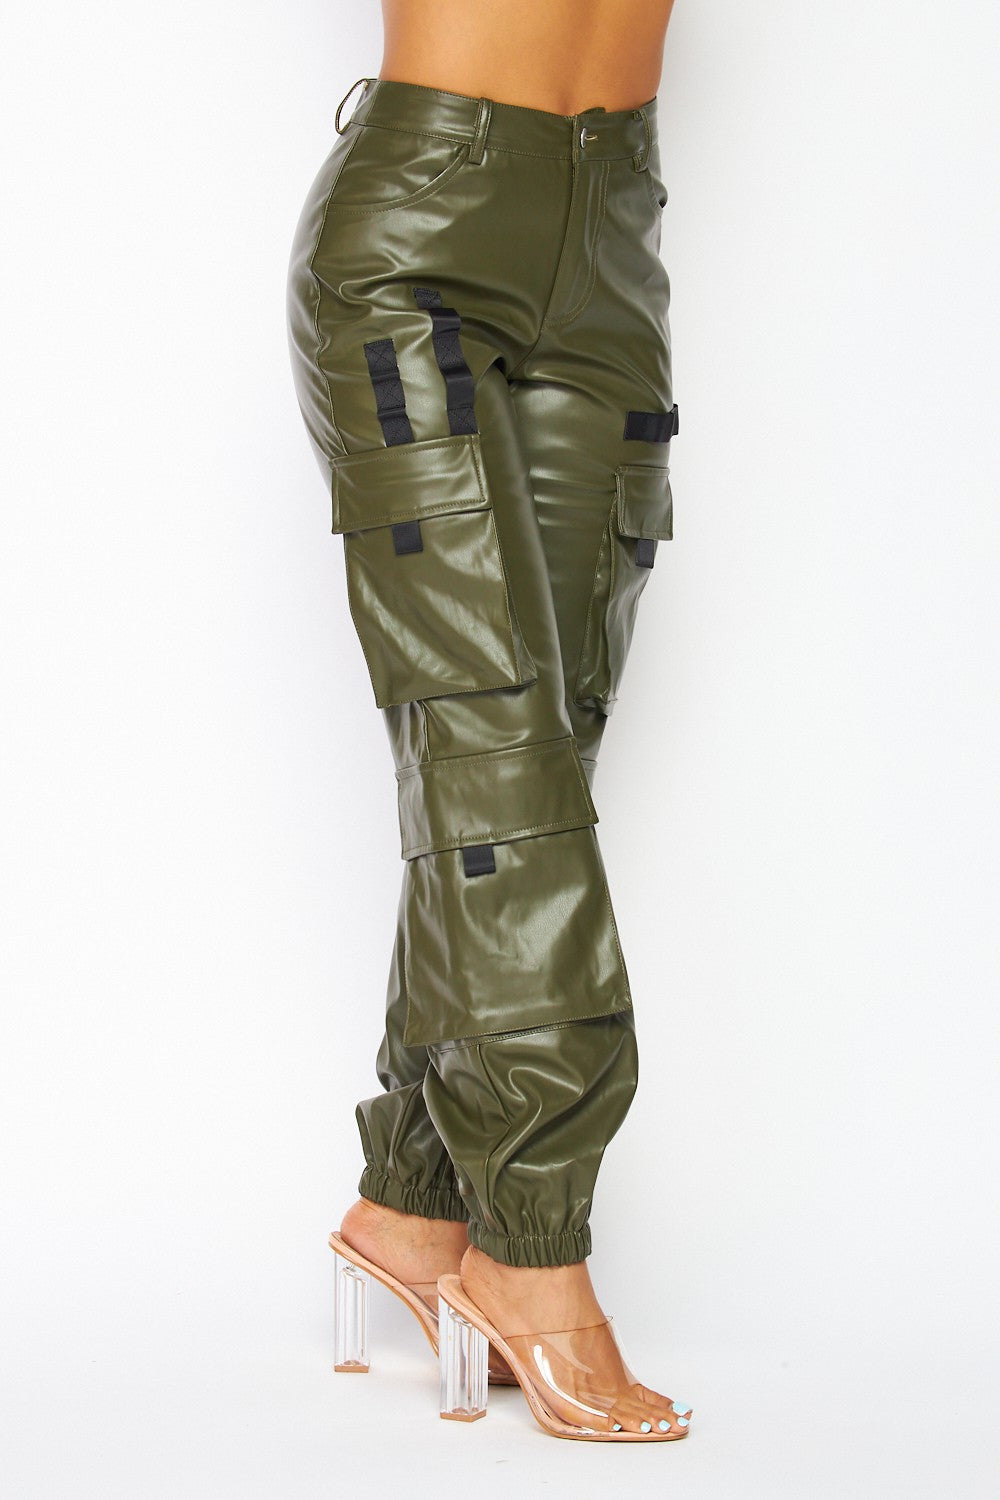 It's My Year Faux Leather Cargo Jogger Pants